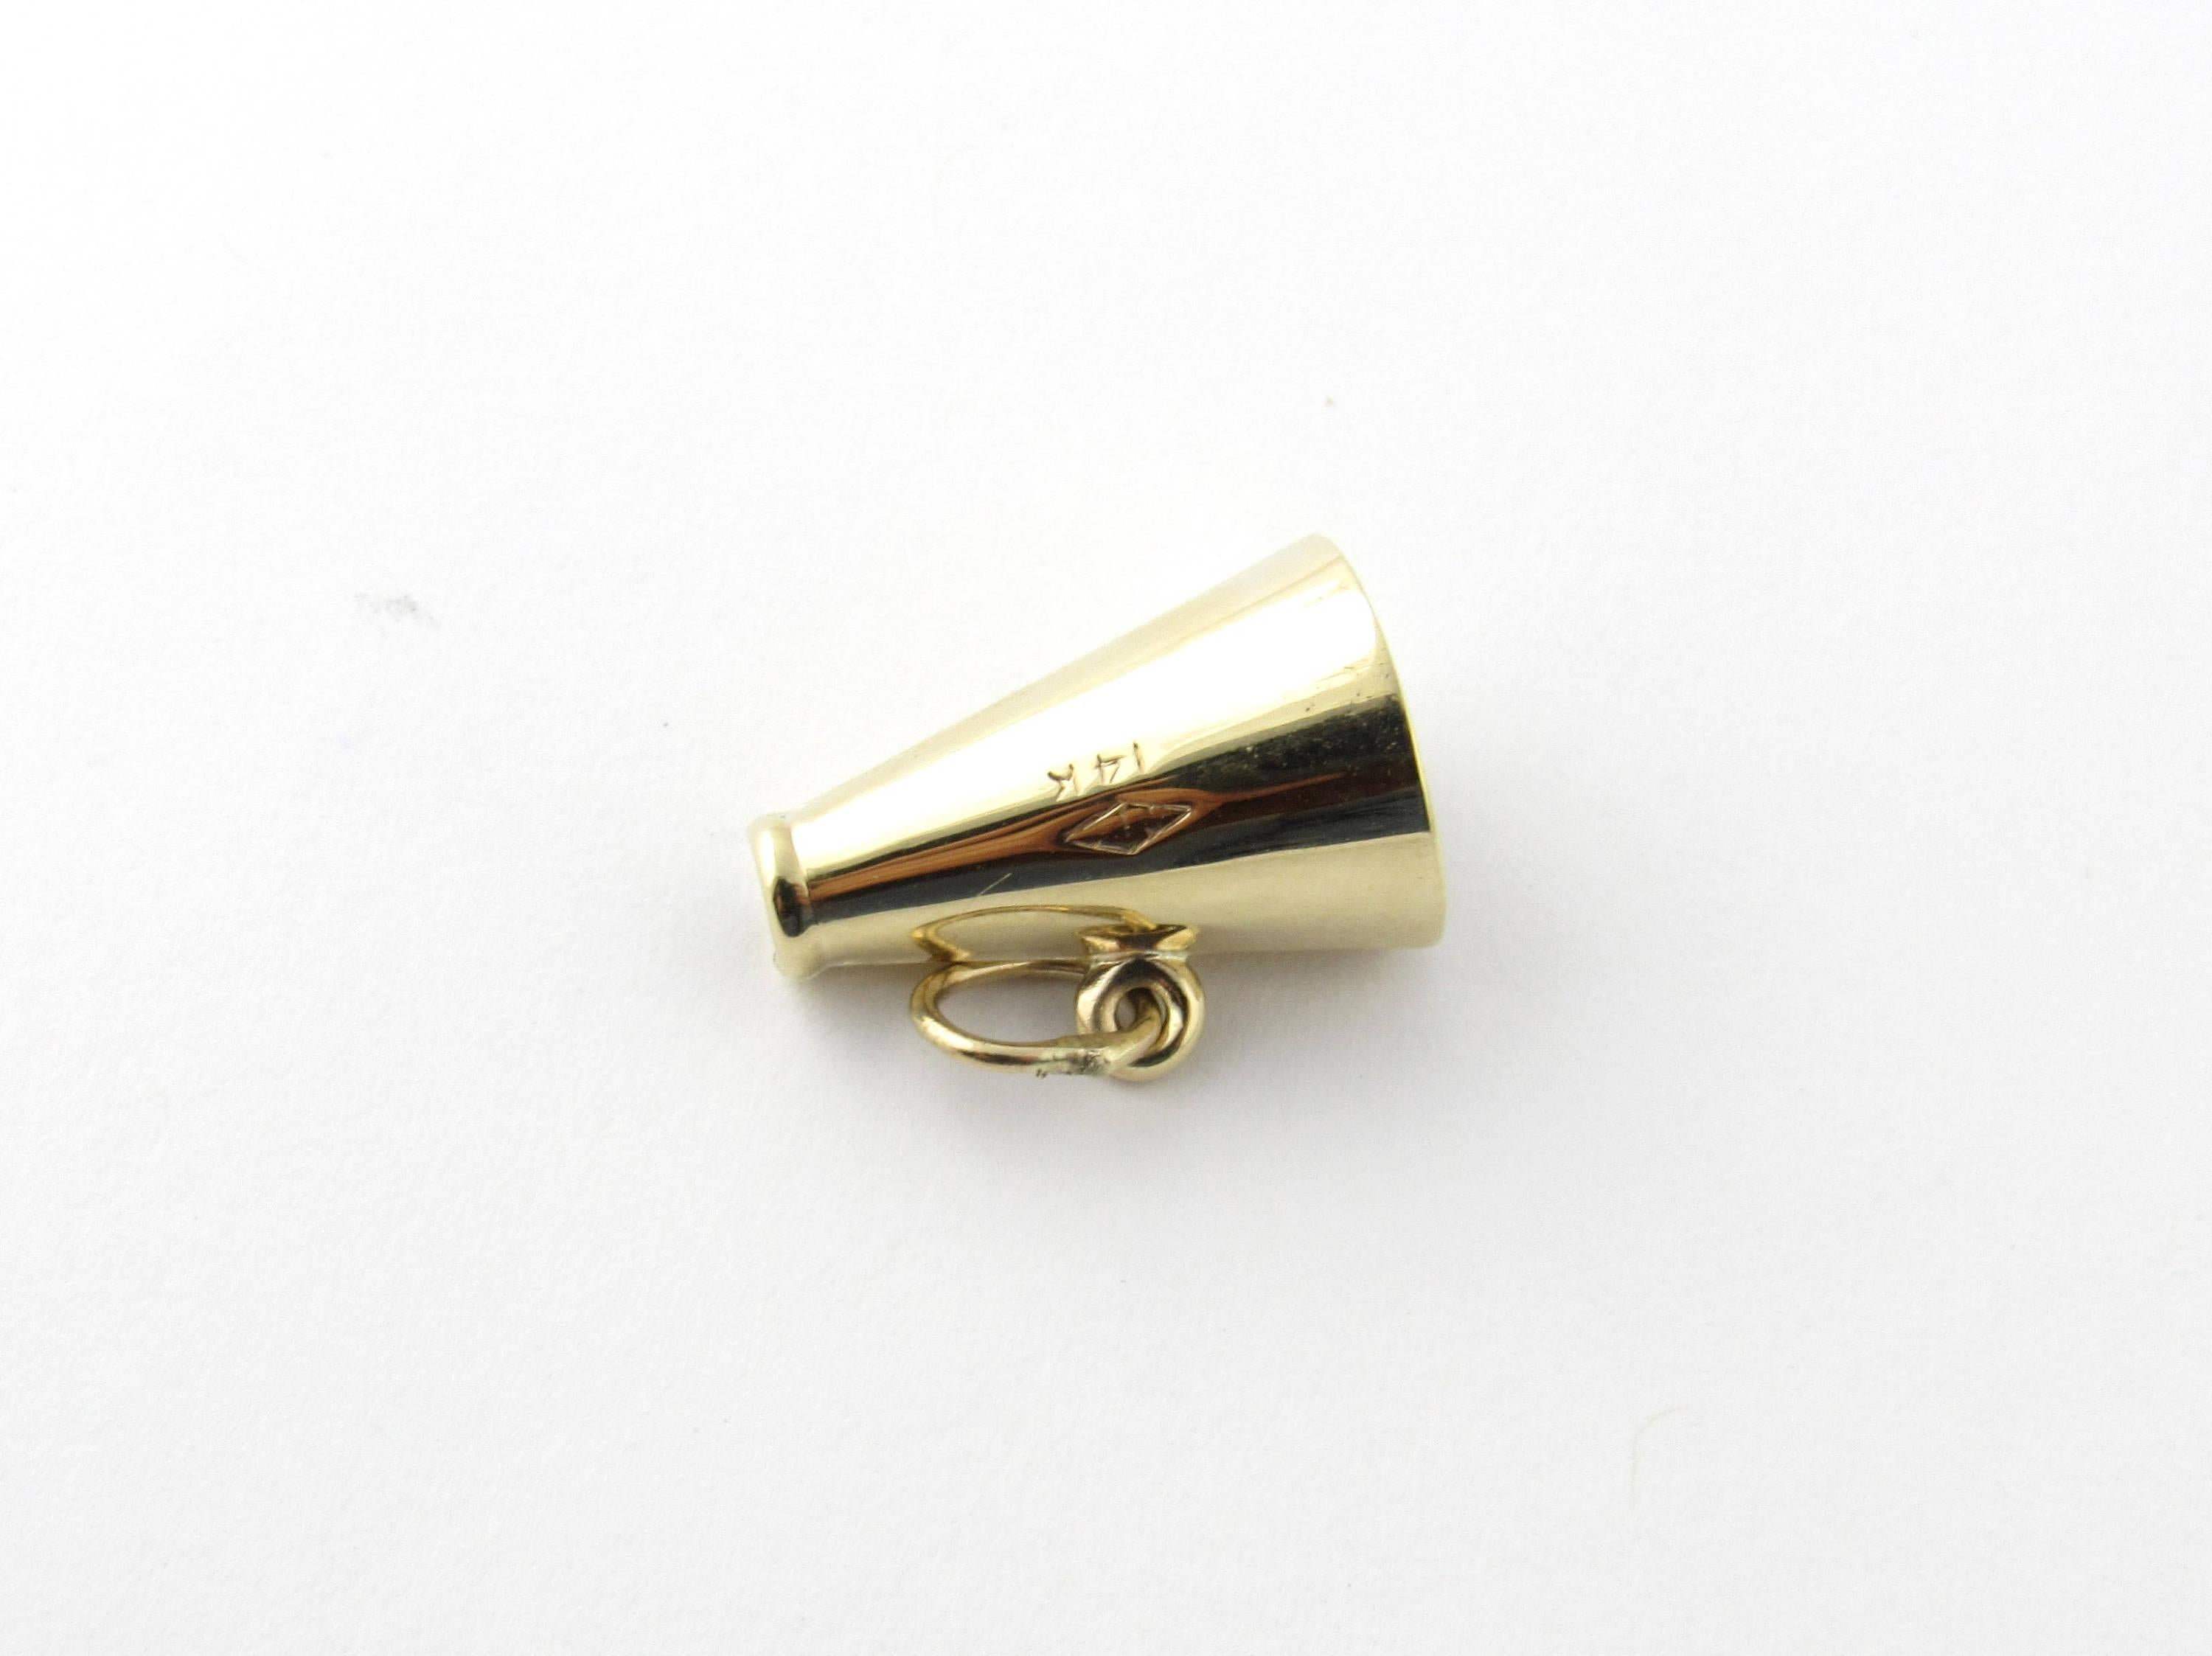 Go team go! 
This 3D charm features a miniature megaphone meticulously detailed in 14K yellow gold. 
Size: 15 mm x 10 mm 
Weight: 0.7 dwt. / 1.1 gr. 
Hallmark: 14K 
Very good condition, professionally polished. 
Will come packaged in a gift box and